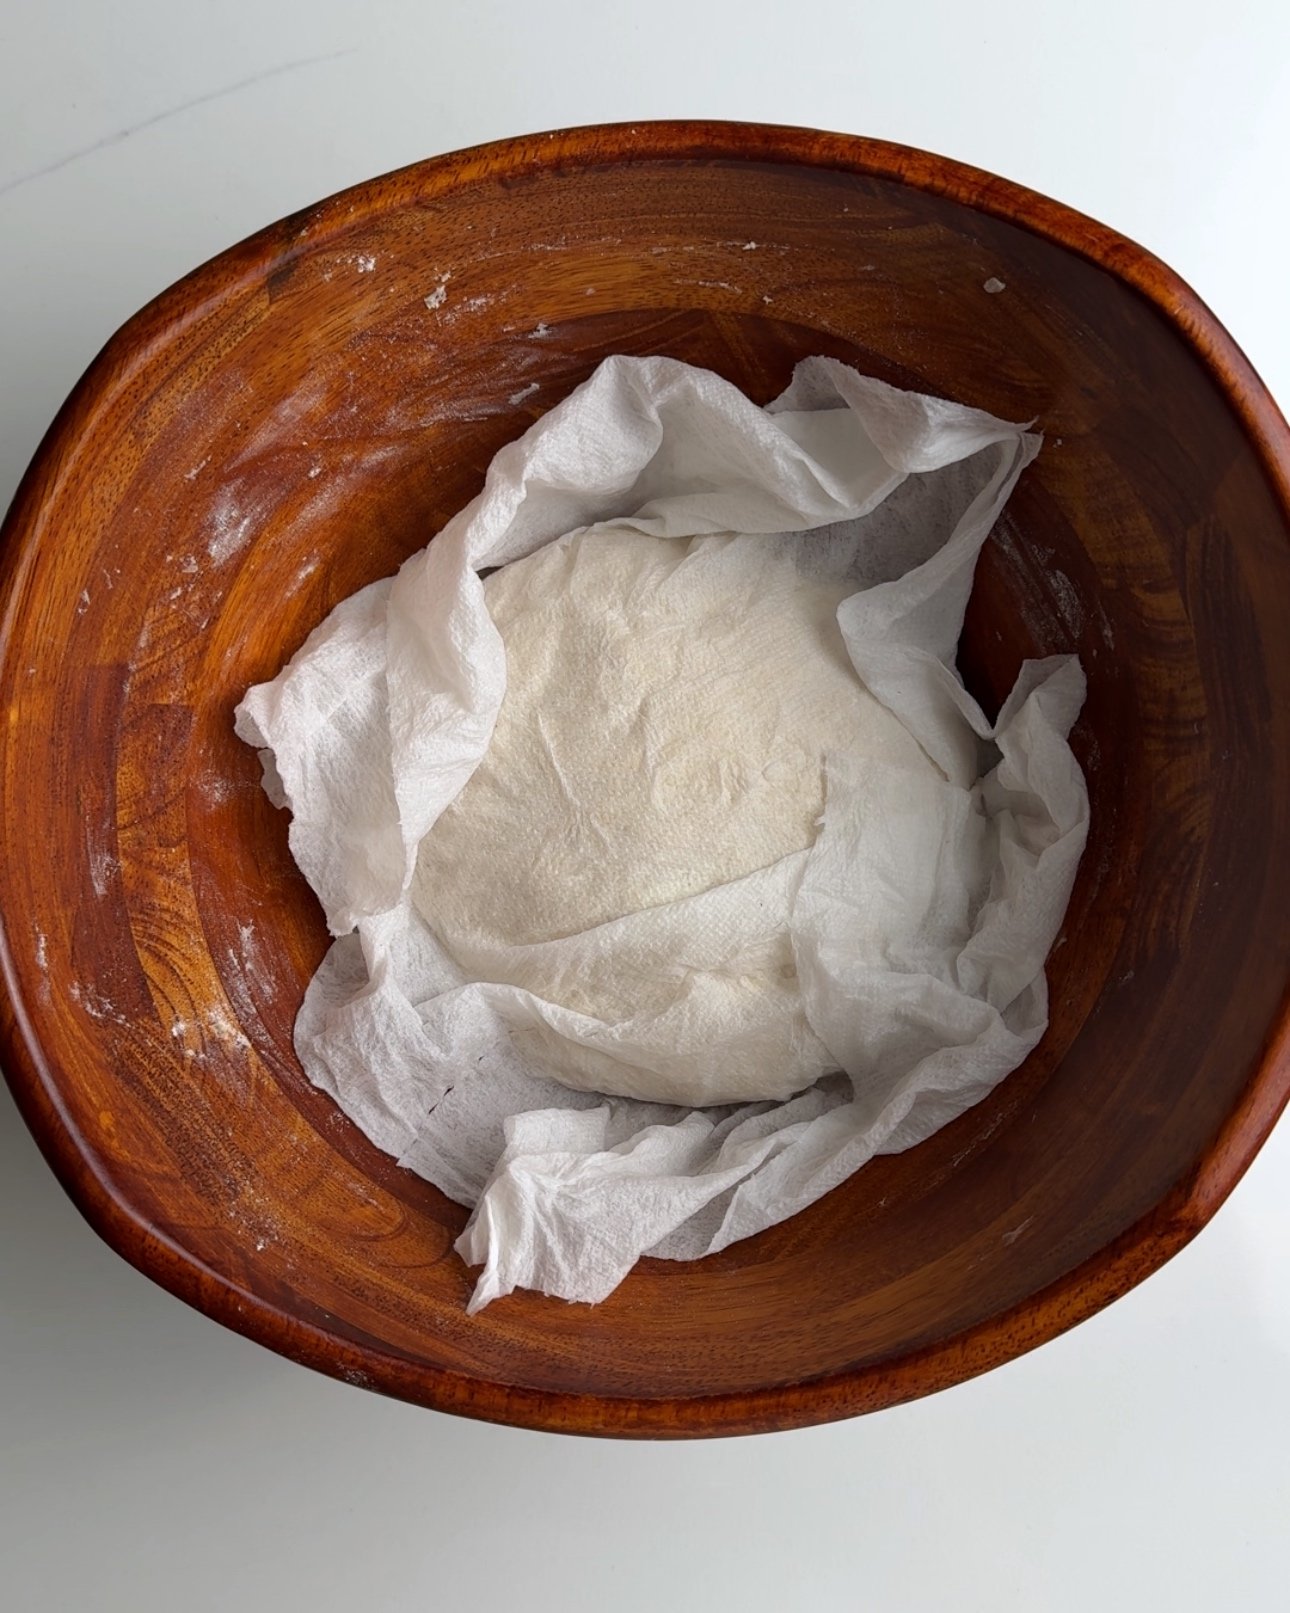 Bake in a wooden bowl resting with a paper towel over the dough